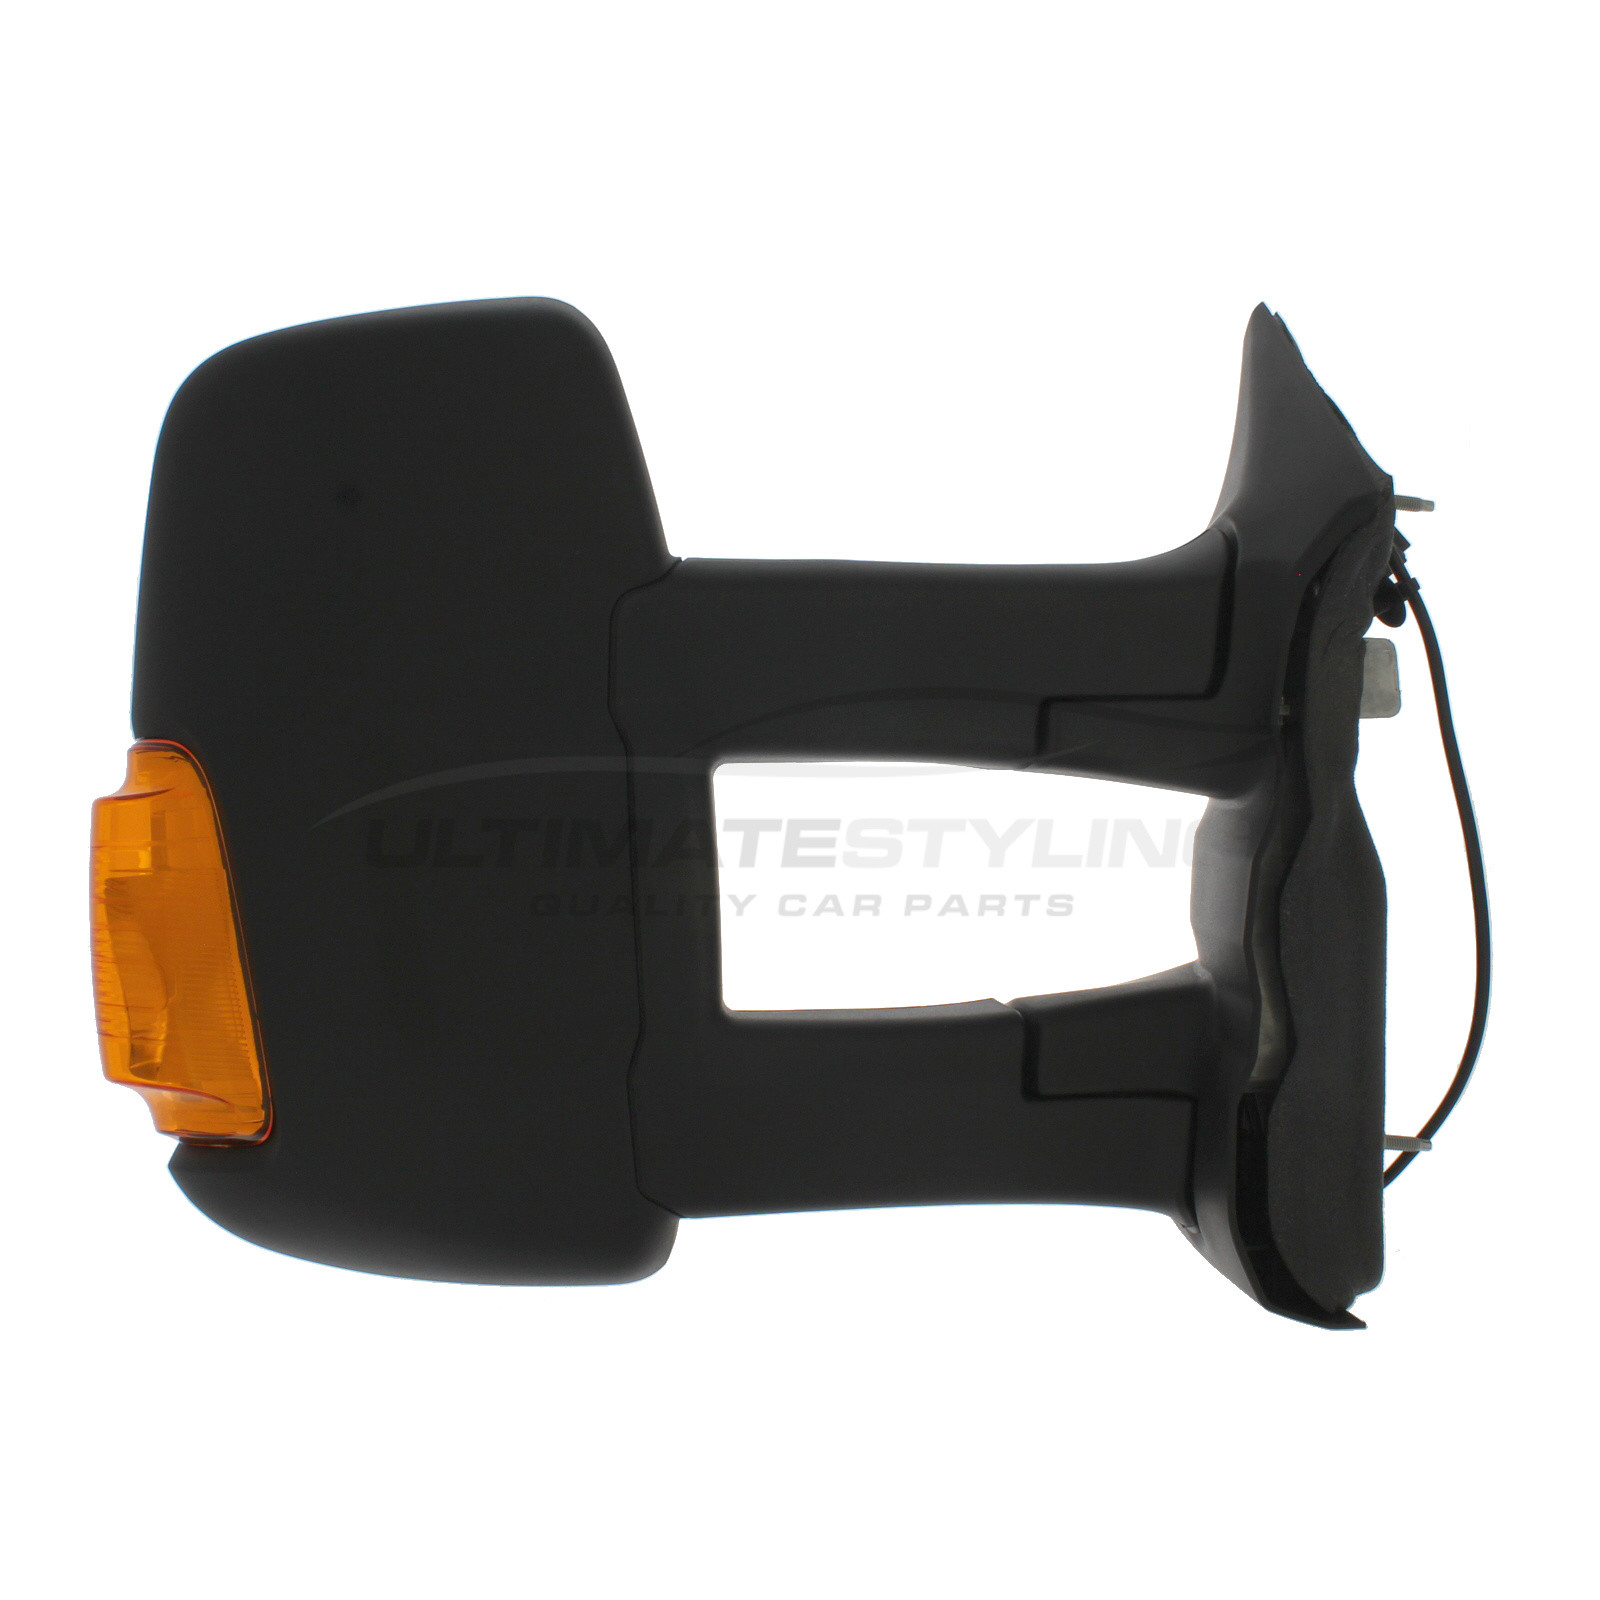 Ford Transit Wing Mirror / Door Mirror - Drivers Side (RH) - Manual adjustment - Non-Heated Glass - Indicator - Black - Textured